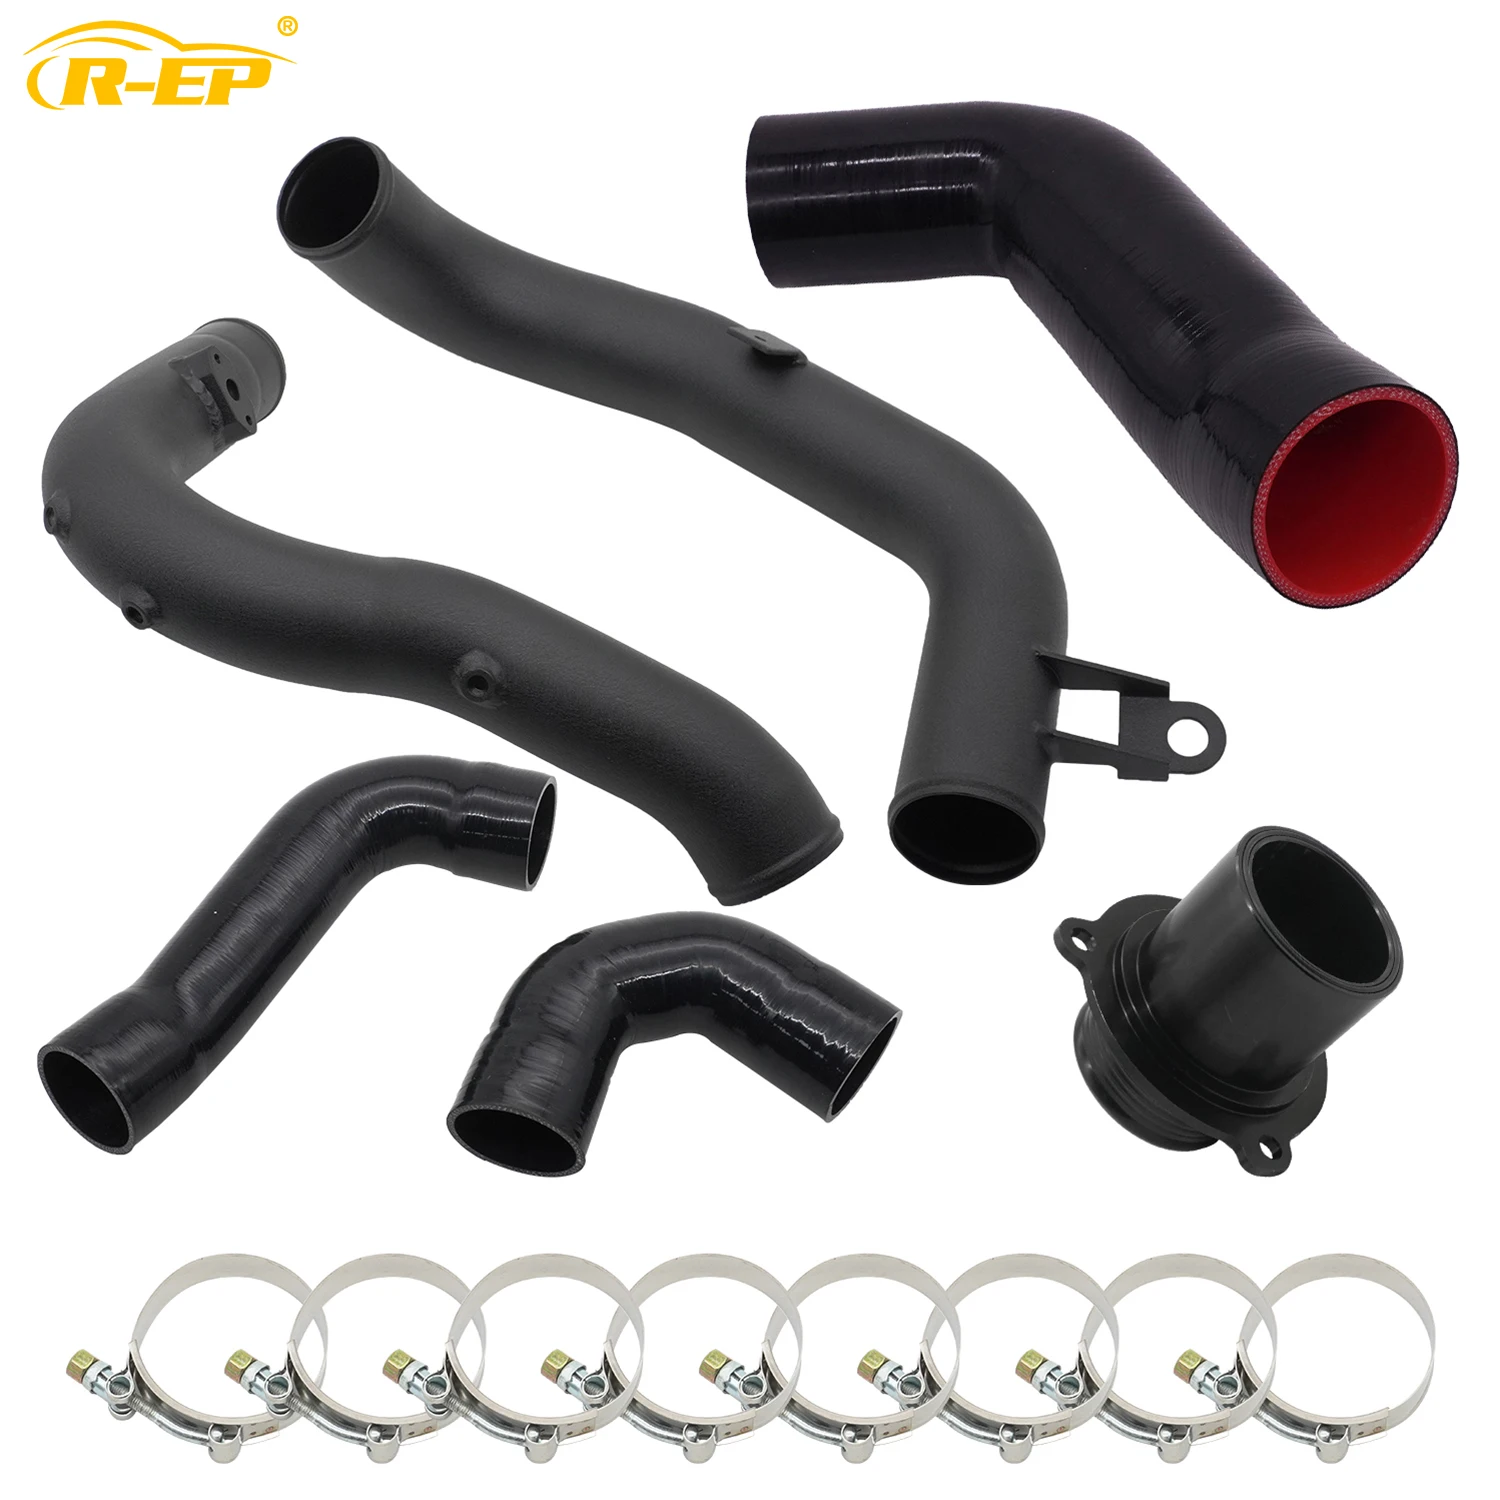 High Flow Intercooler Turbo Charge Pipe Kit with Muffler Delete for VW Golf MK7 GTI MQB EA888 Gen3 Audi S3 A3 8V Cupra 1.8T 2.0T